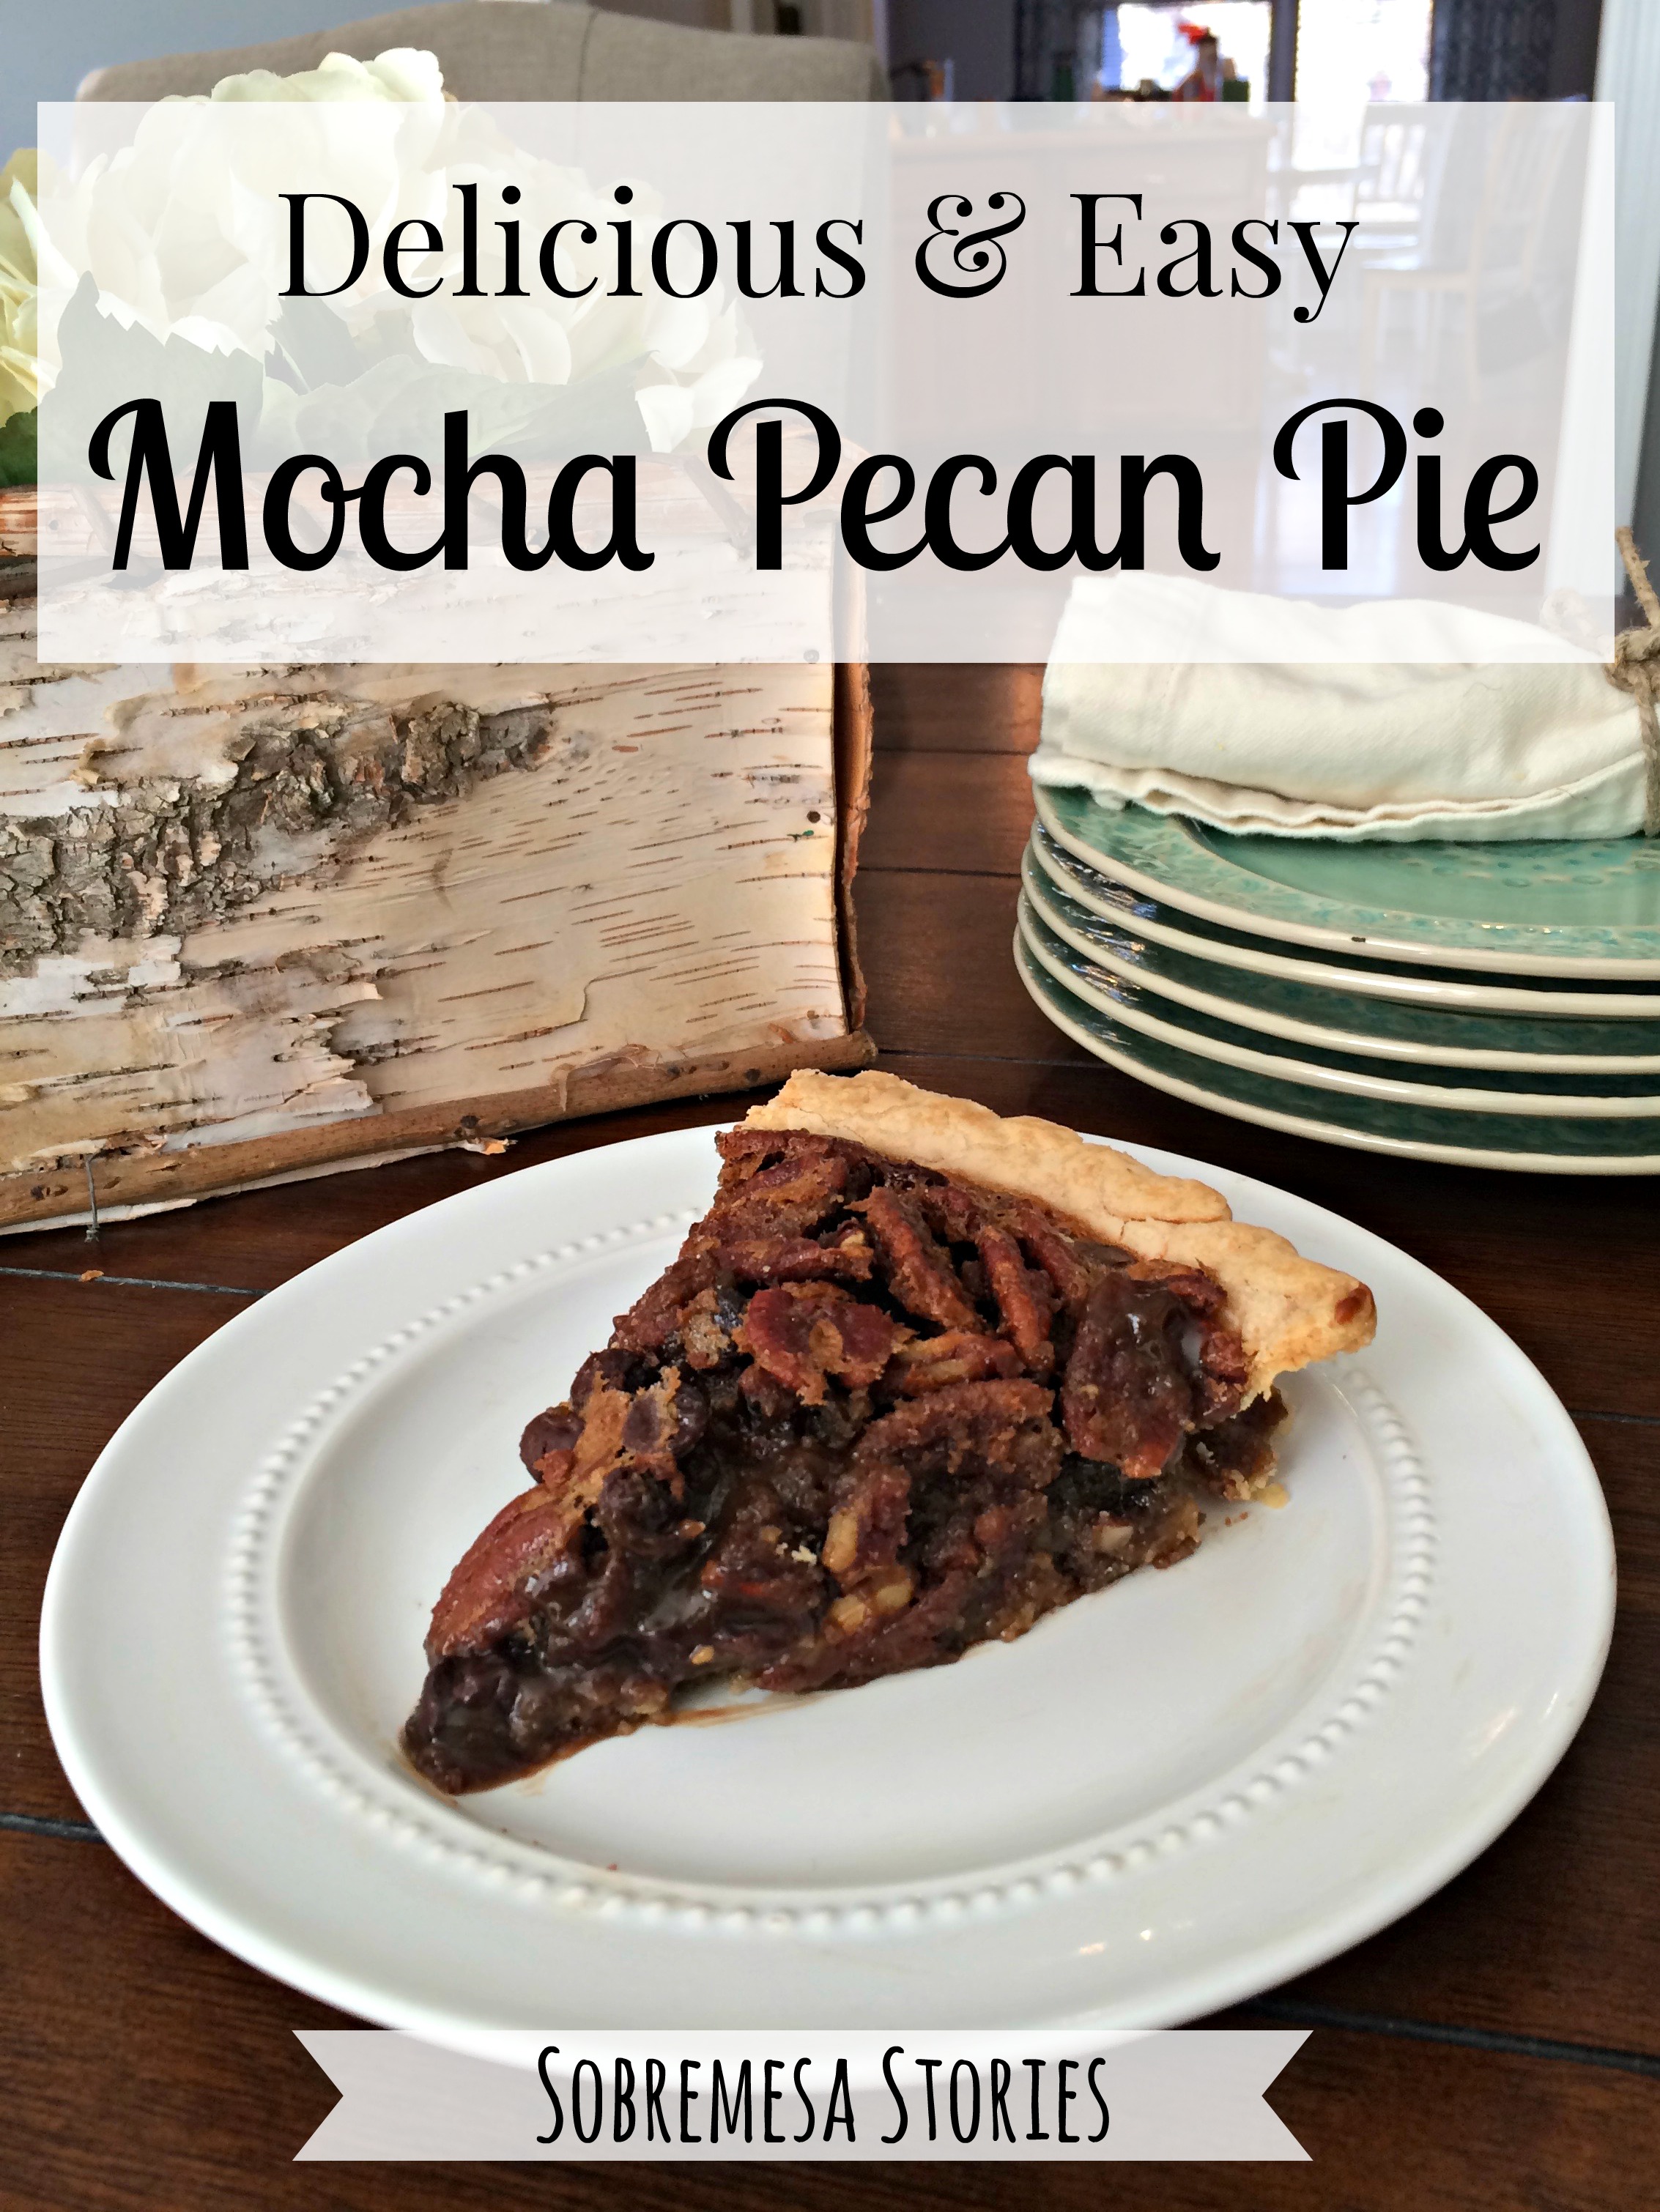 This delicious mocha pecan pie is SO easy to make and full of chocolate, pecan, and coffee flavors. A must-try for Thanksgiving and Christmas!